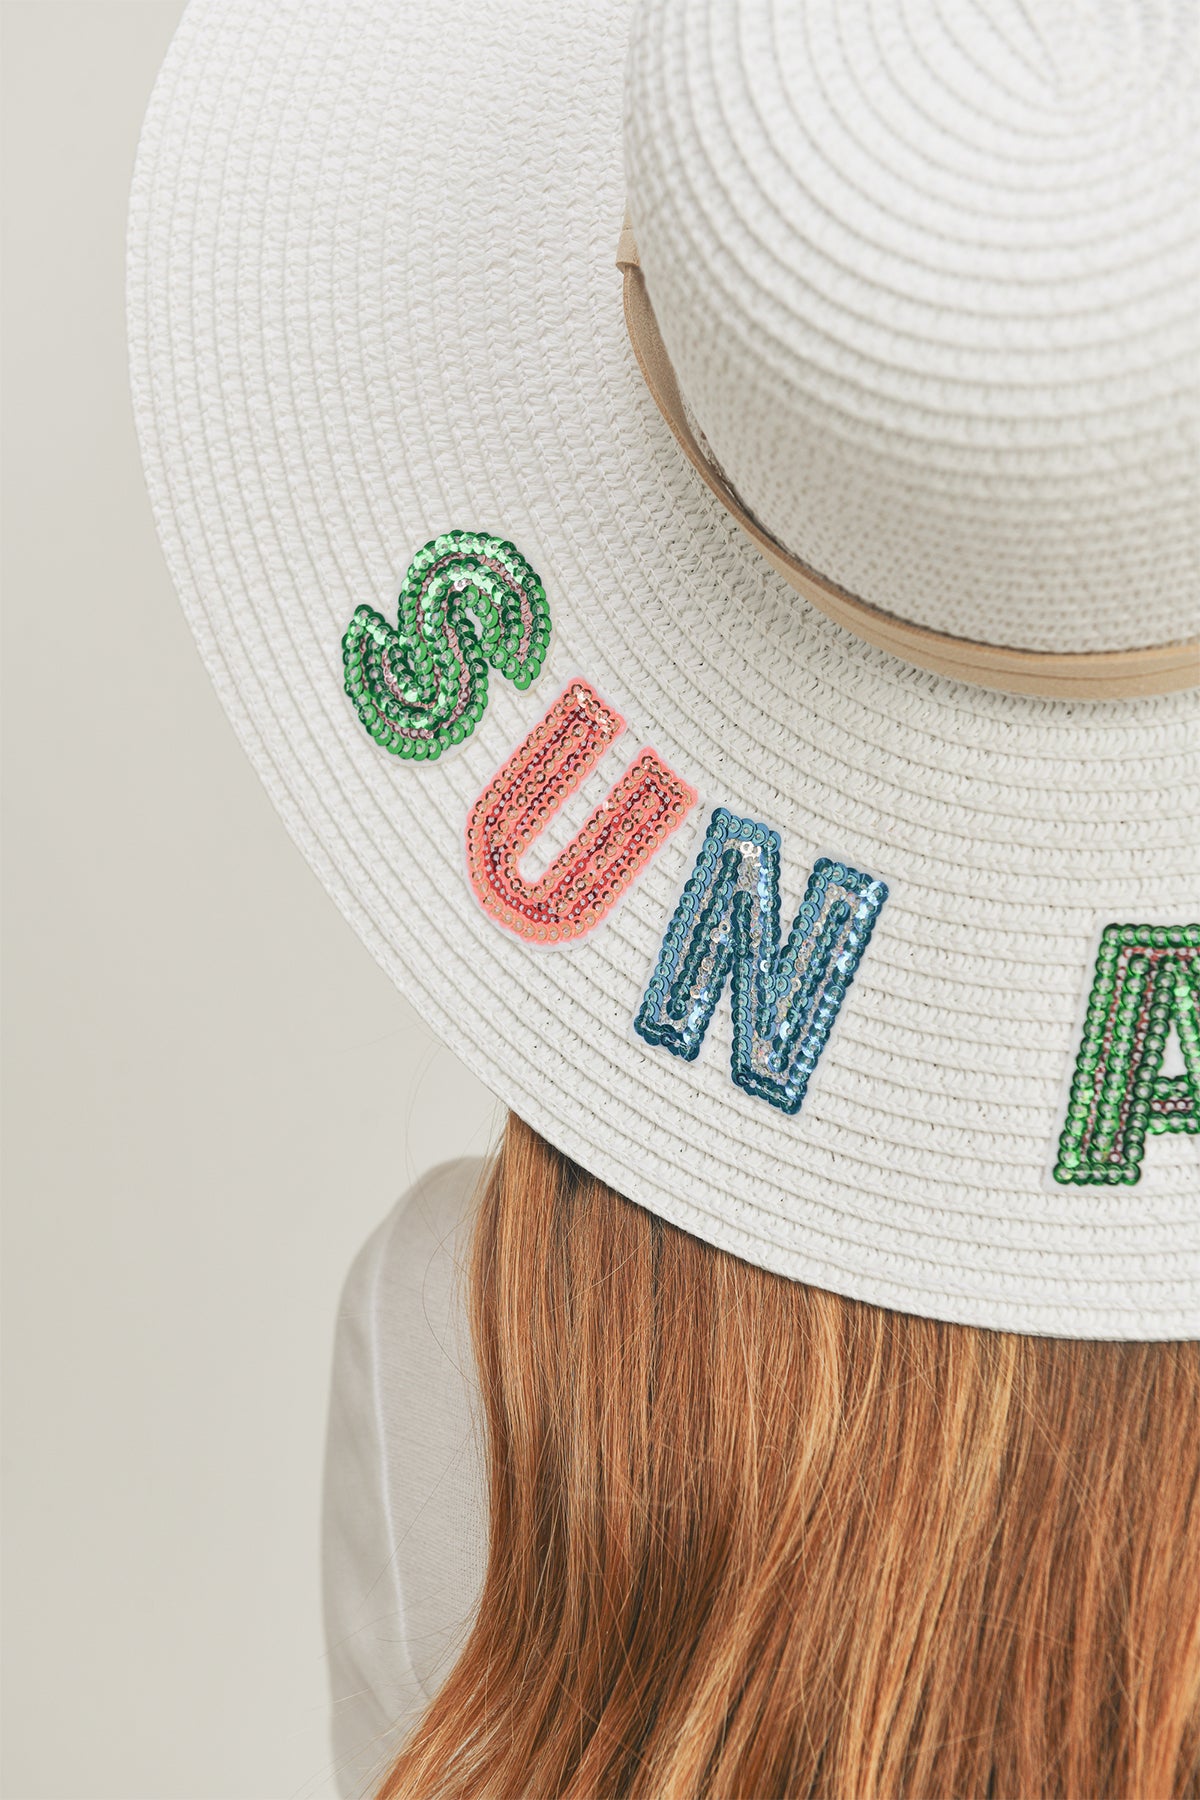 SEQUIN LETTER SUN AND FUN FLOPPY HAT